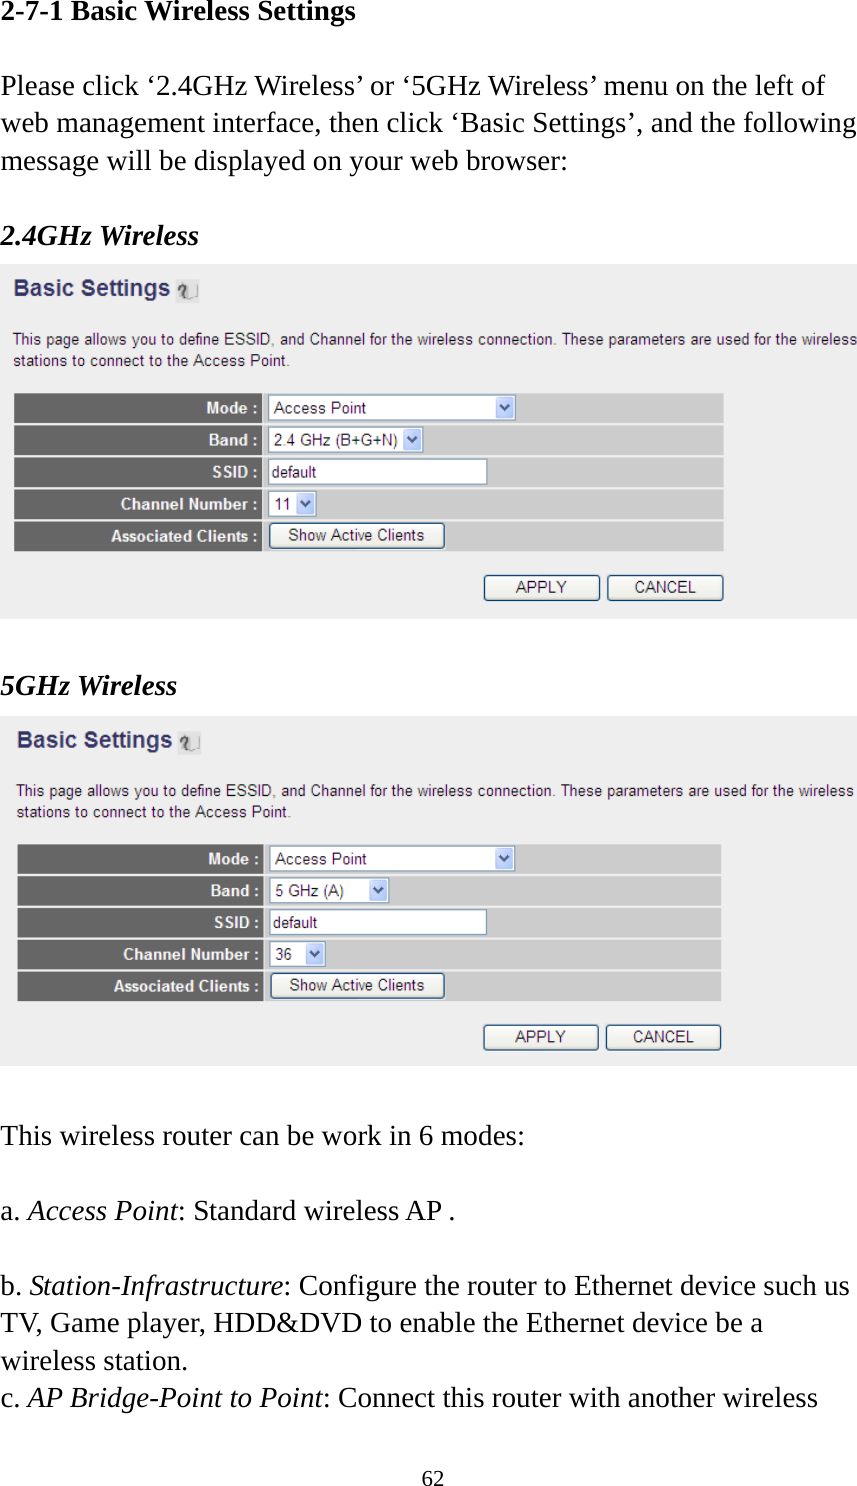 62 2-7-1 Basic Wireless Settings  Please click ‘2.4GHz Wireless’ or ‘5GHz Wireless’ menu on the left of web management interface, then click ‘Basic Settings’, and the following message will be displayed on your web browser:  2.4GHz Wireless   5GHz Wireless   This wireless router can be work in 6 modes:    a. Access Point: Standard wireless AP .  b. Station-Infrastructure: Configure the router to Ethernet device such us TV, Game player, HDD&amp;DVD to enable the Ethernet device be a wireless station. c. AP Bridge-Point to Point: Connect this router with another wireless 